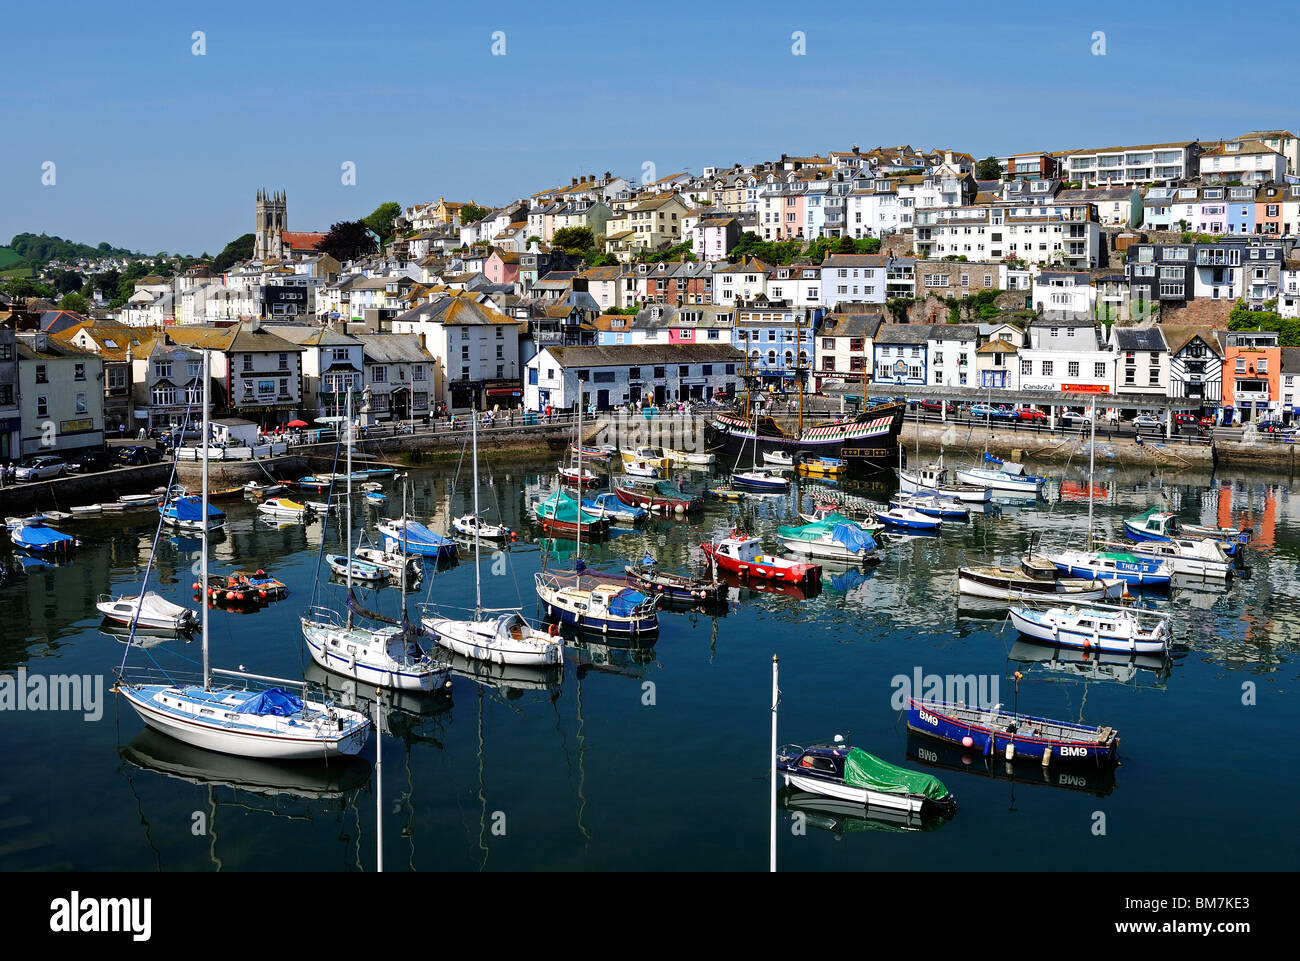 high tide in the harbour at brixham, devon, england, uk Stock Photo